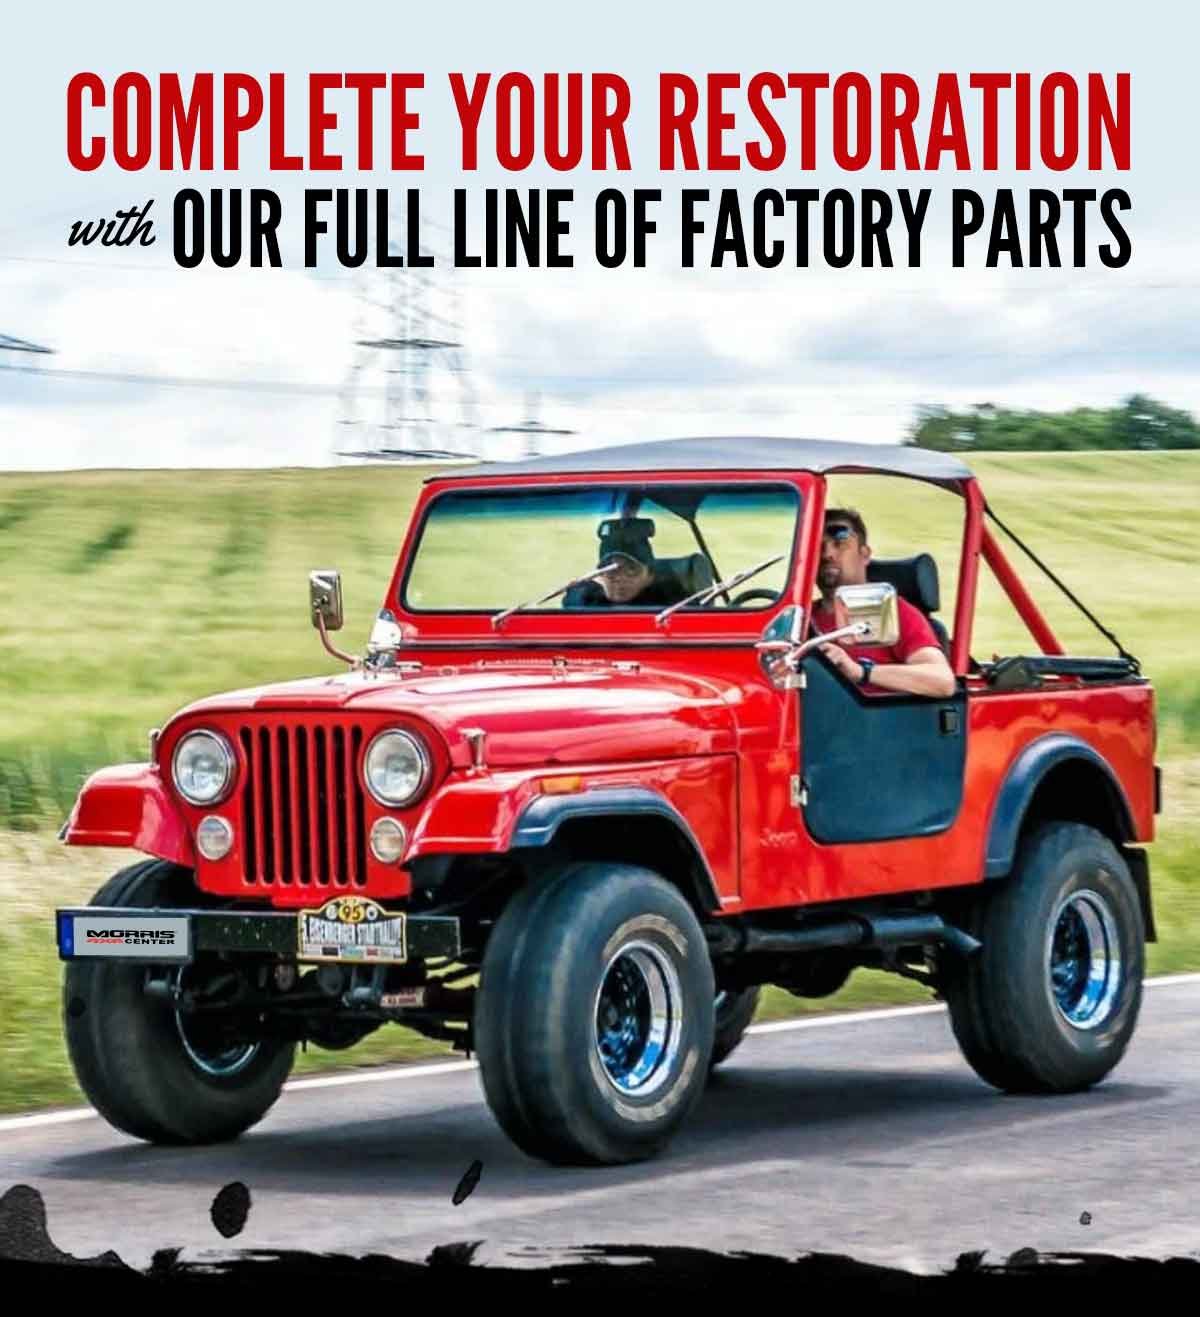 Complete Your Restoration With Our Full Line Of Factory Parts